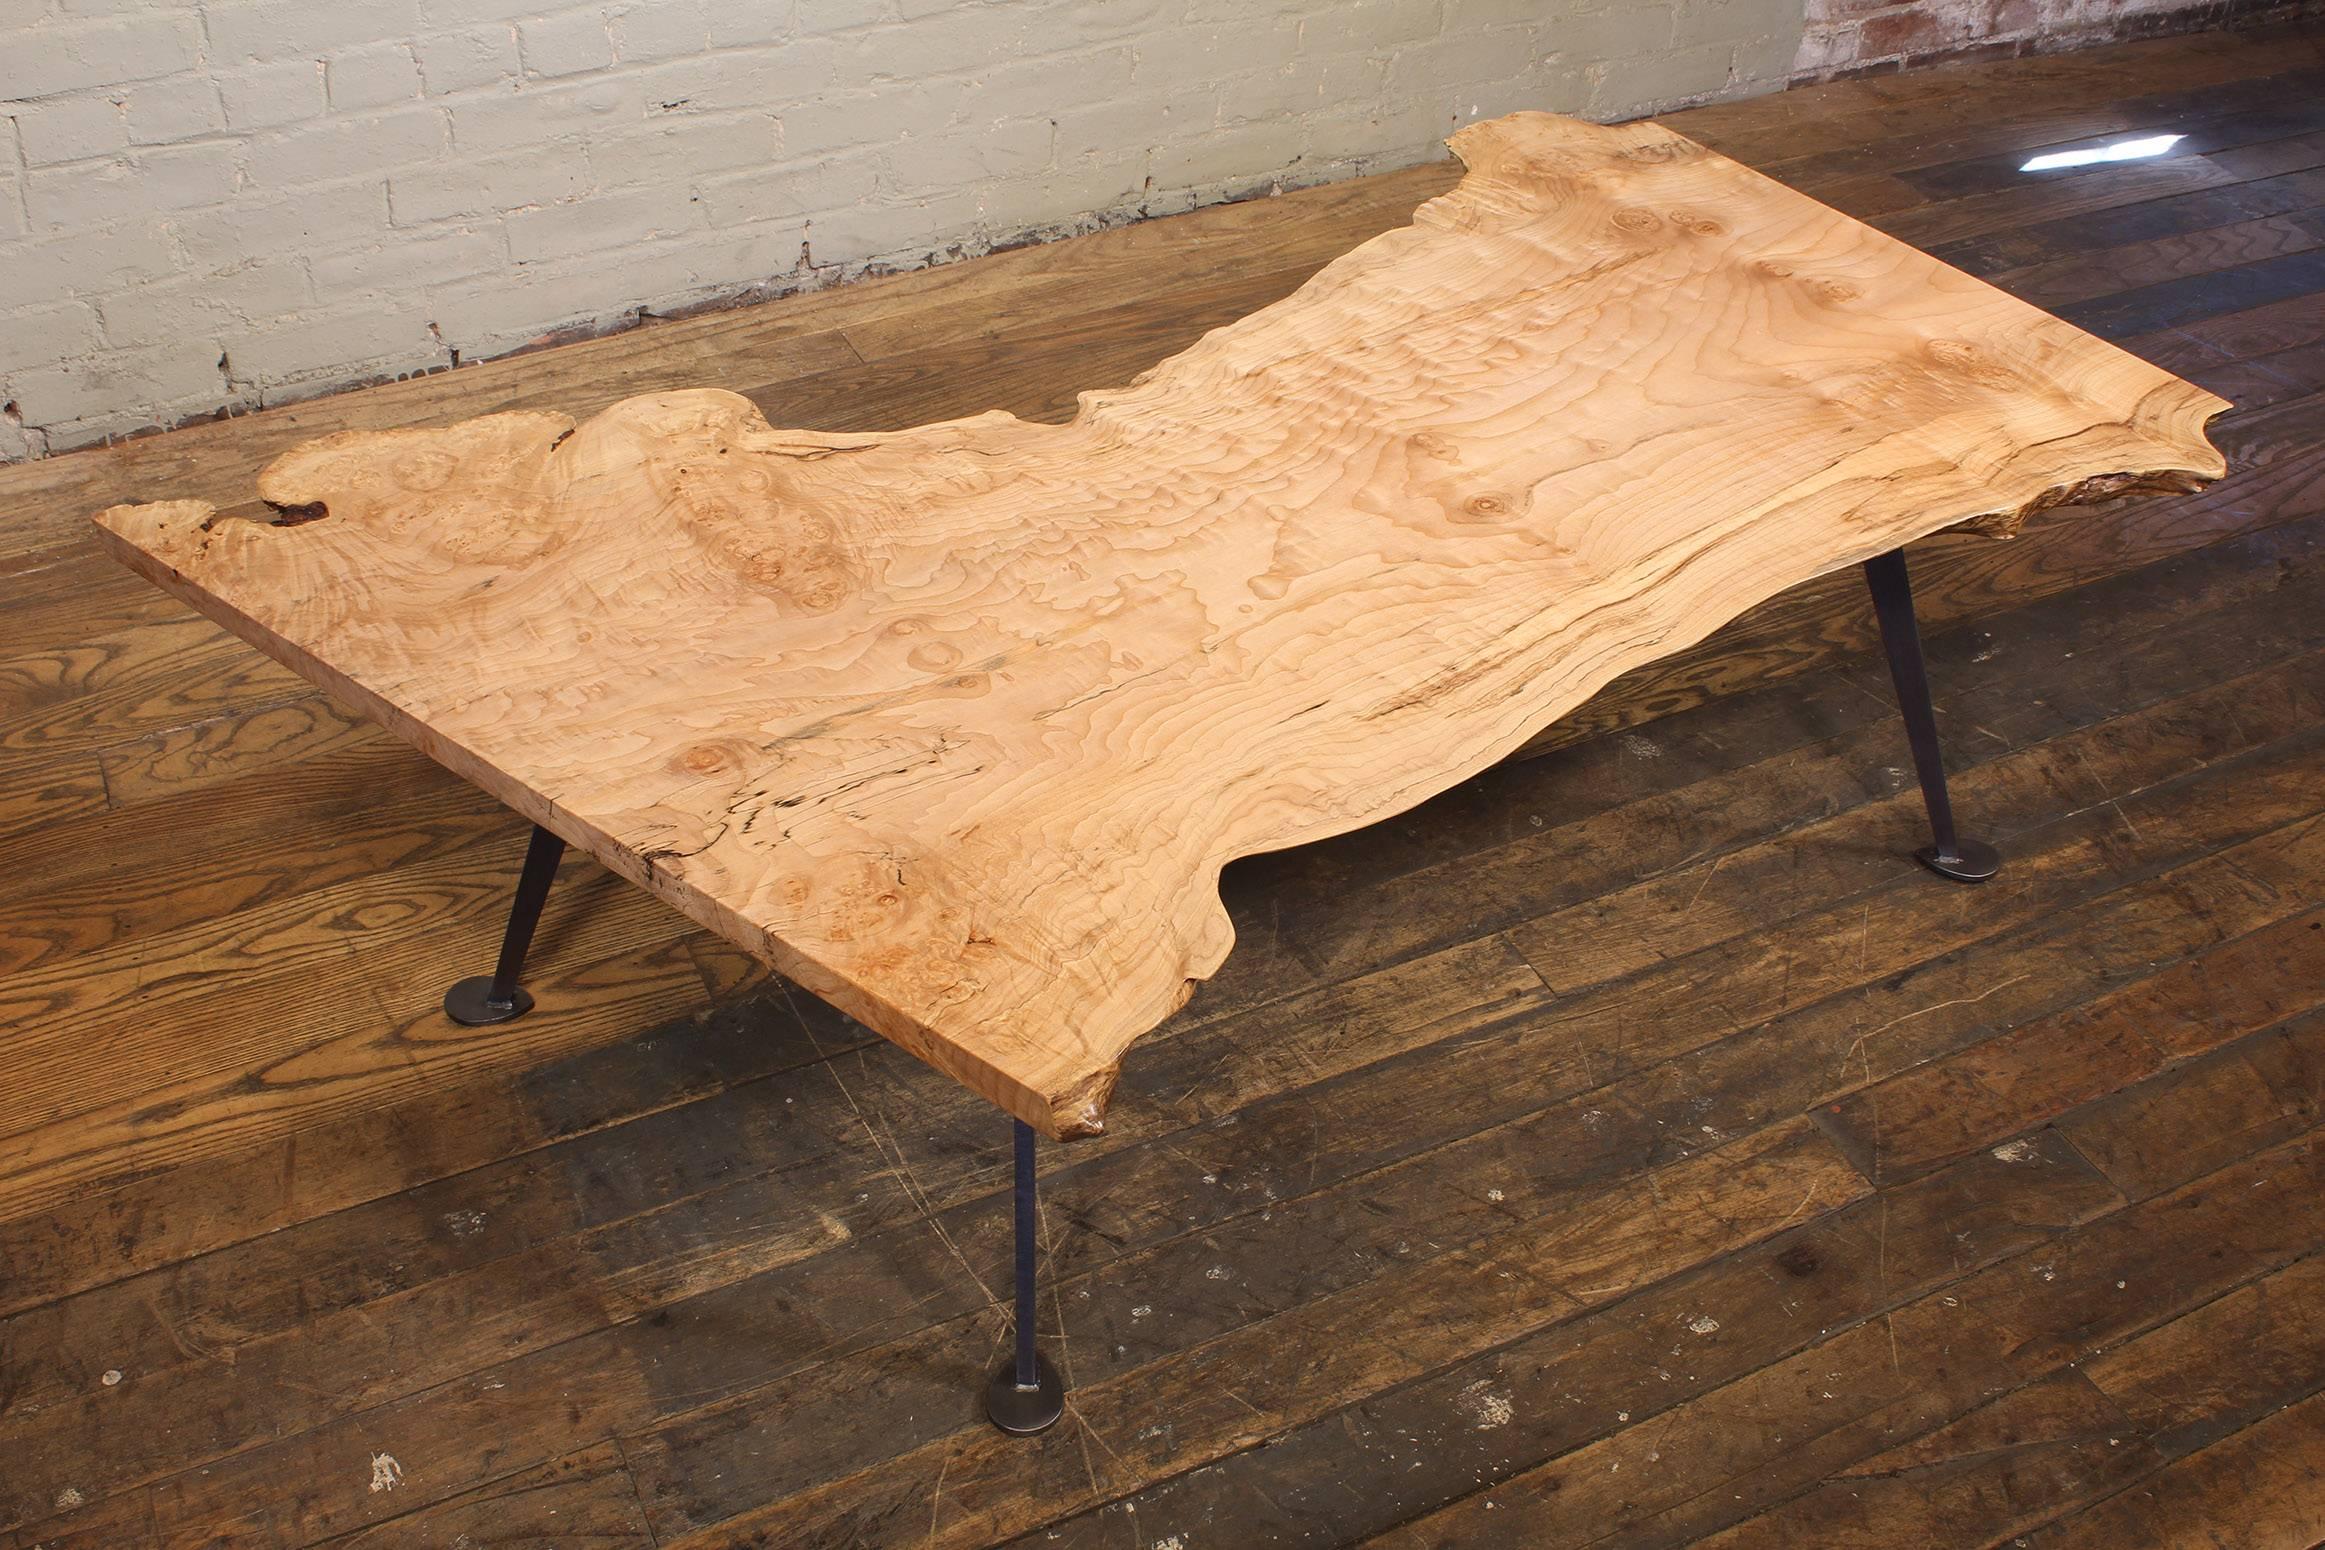 Mid-Century Modern / Industrial style free-form live-edge maple burl coffee table with steel legs. Length at longest point measures 52 1/2